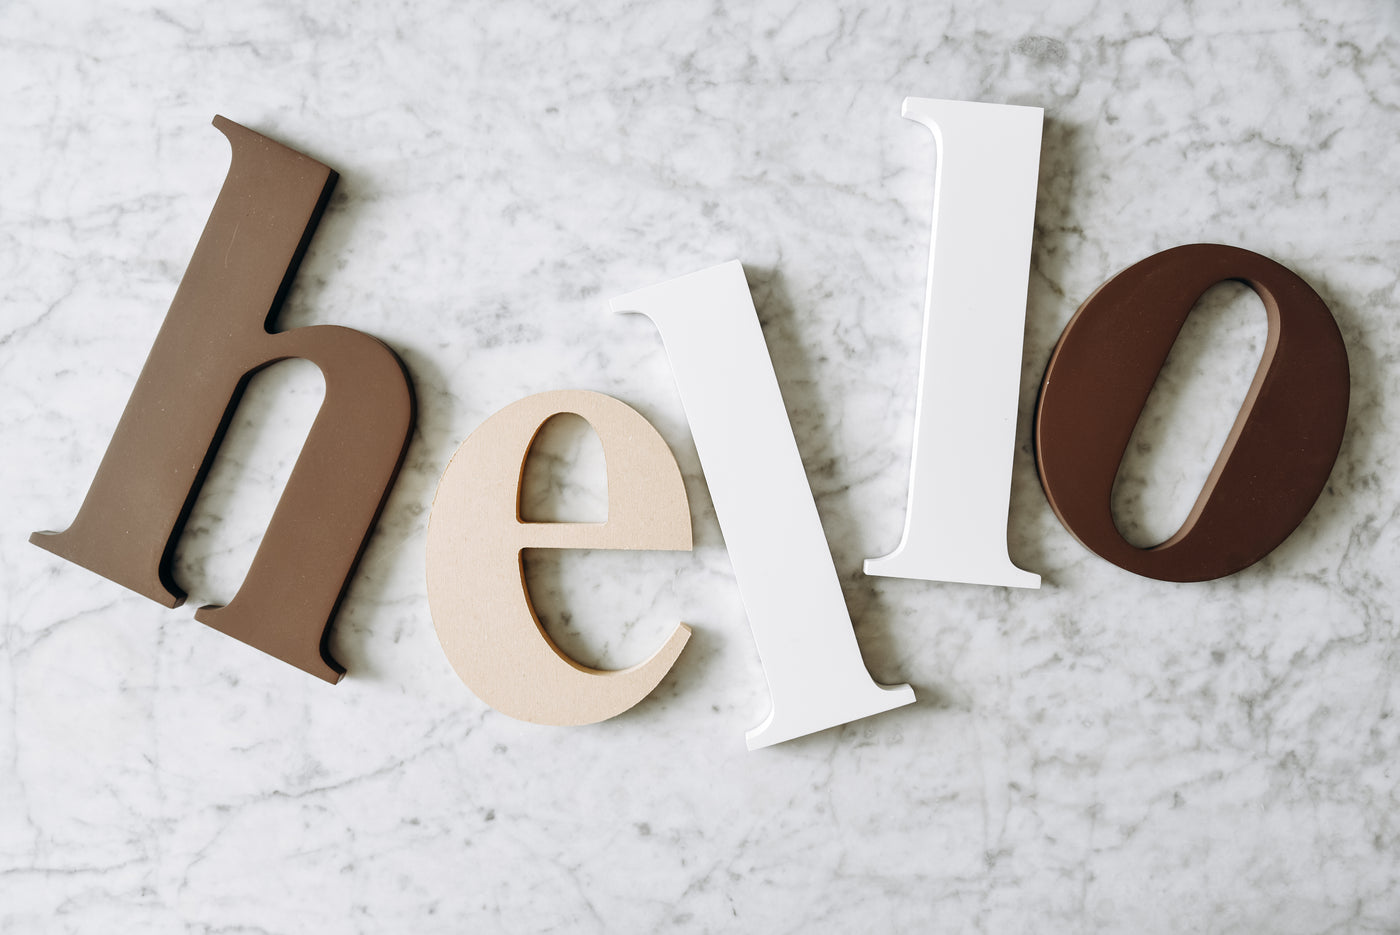 Get Creative With Wood Letters!